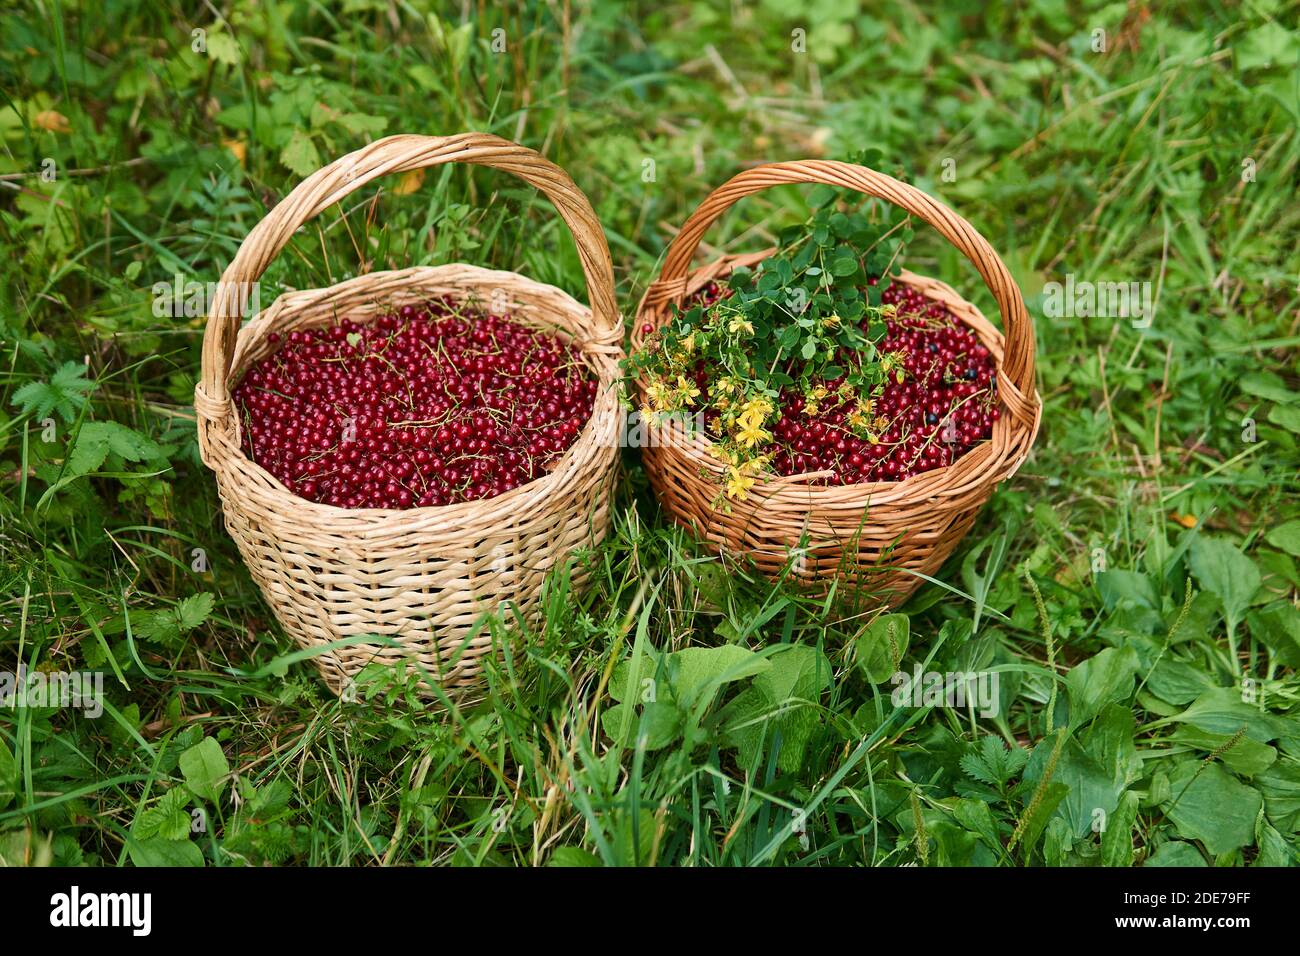 two wicker baskets full of red currant berries and a bunch of St. John's wort flowers stand in the grass Stock Photo